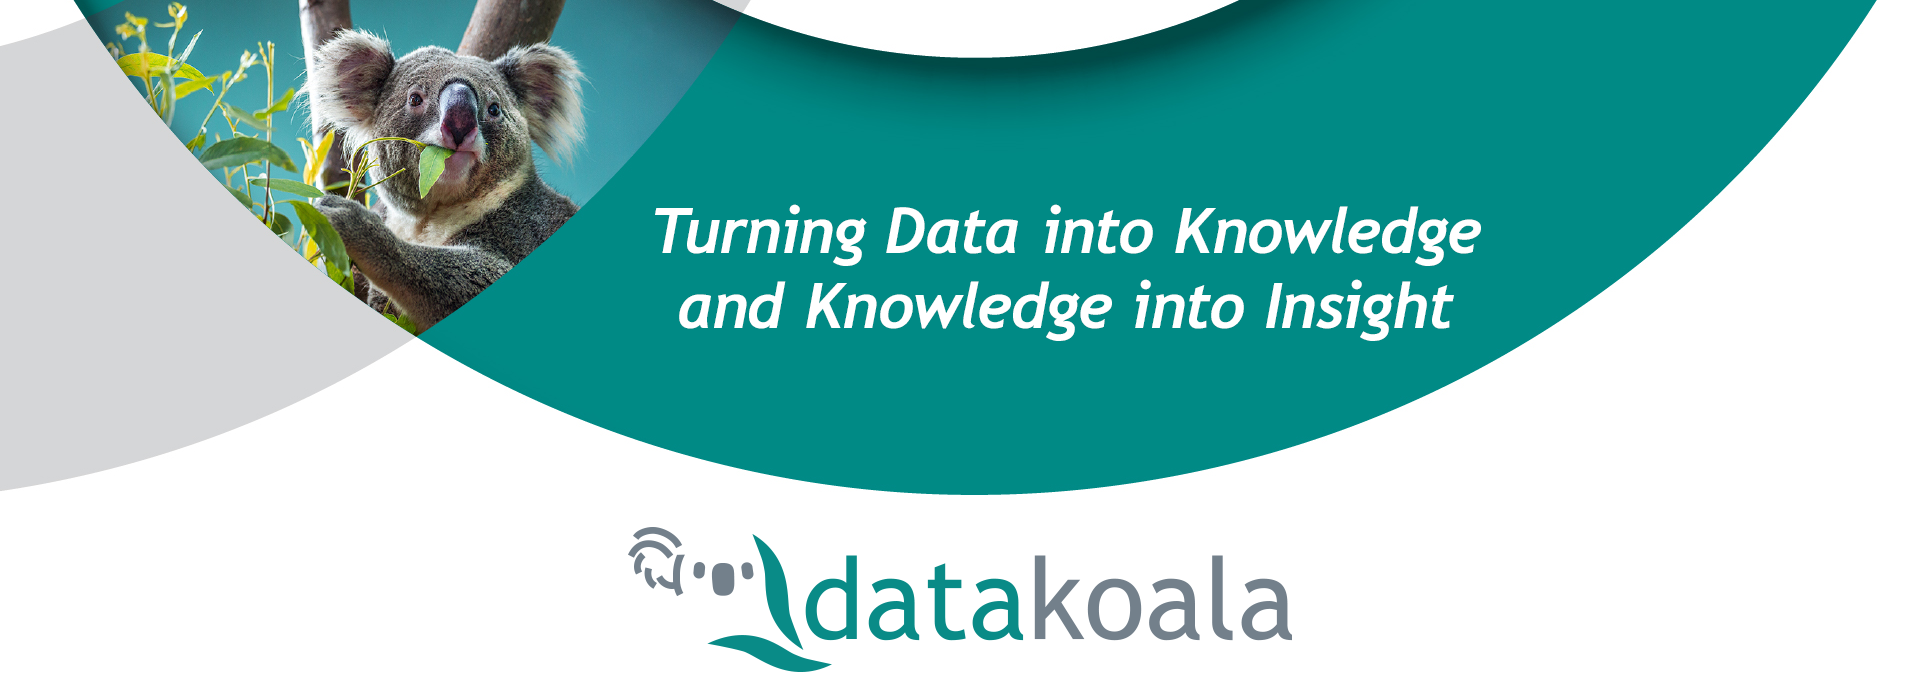 Data Koala Turning Data into Knowledge and Knowledge into Insight with picture of a koala bear